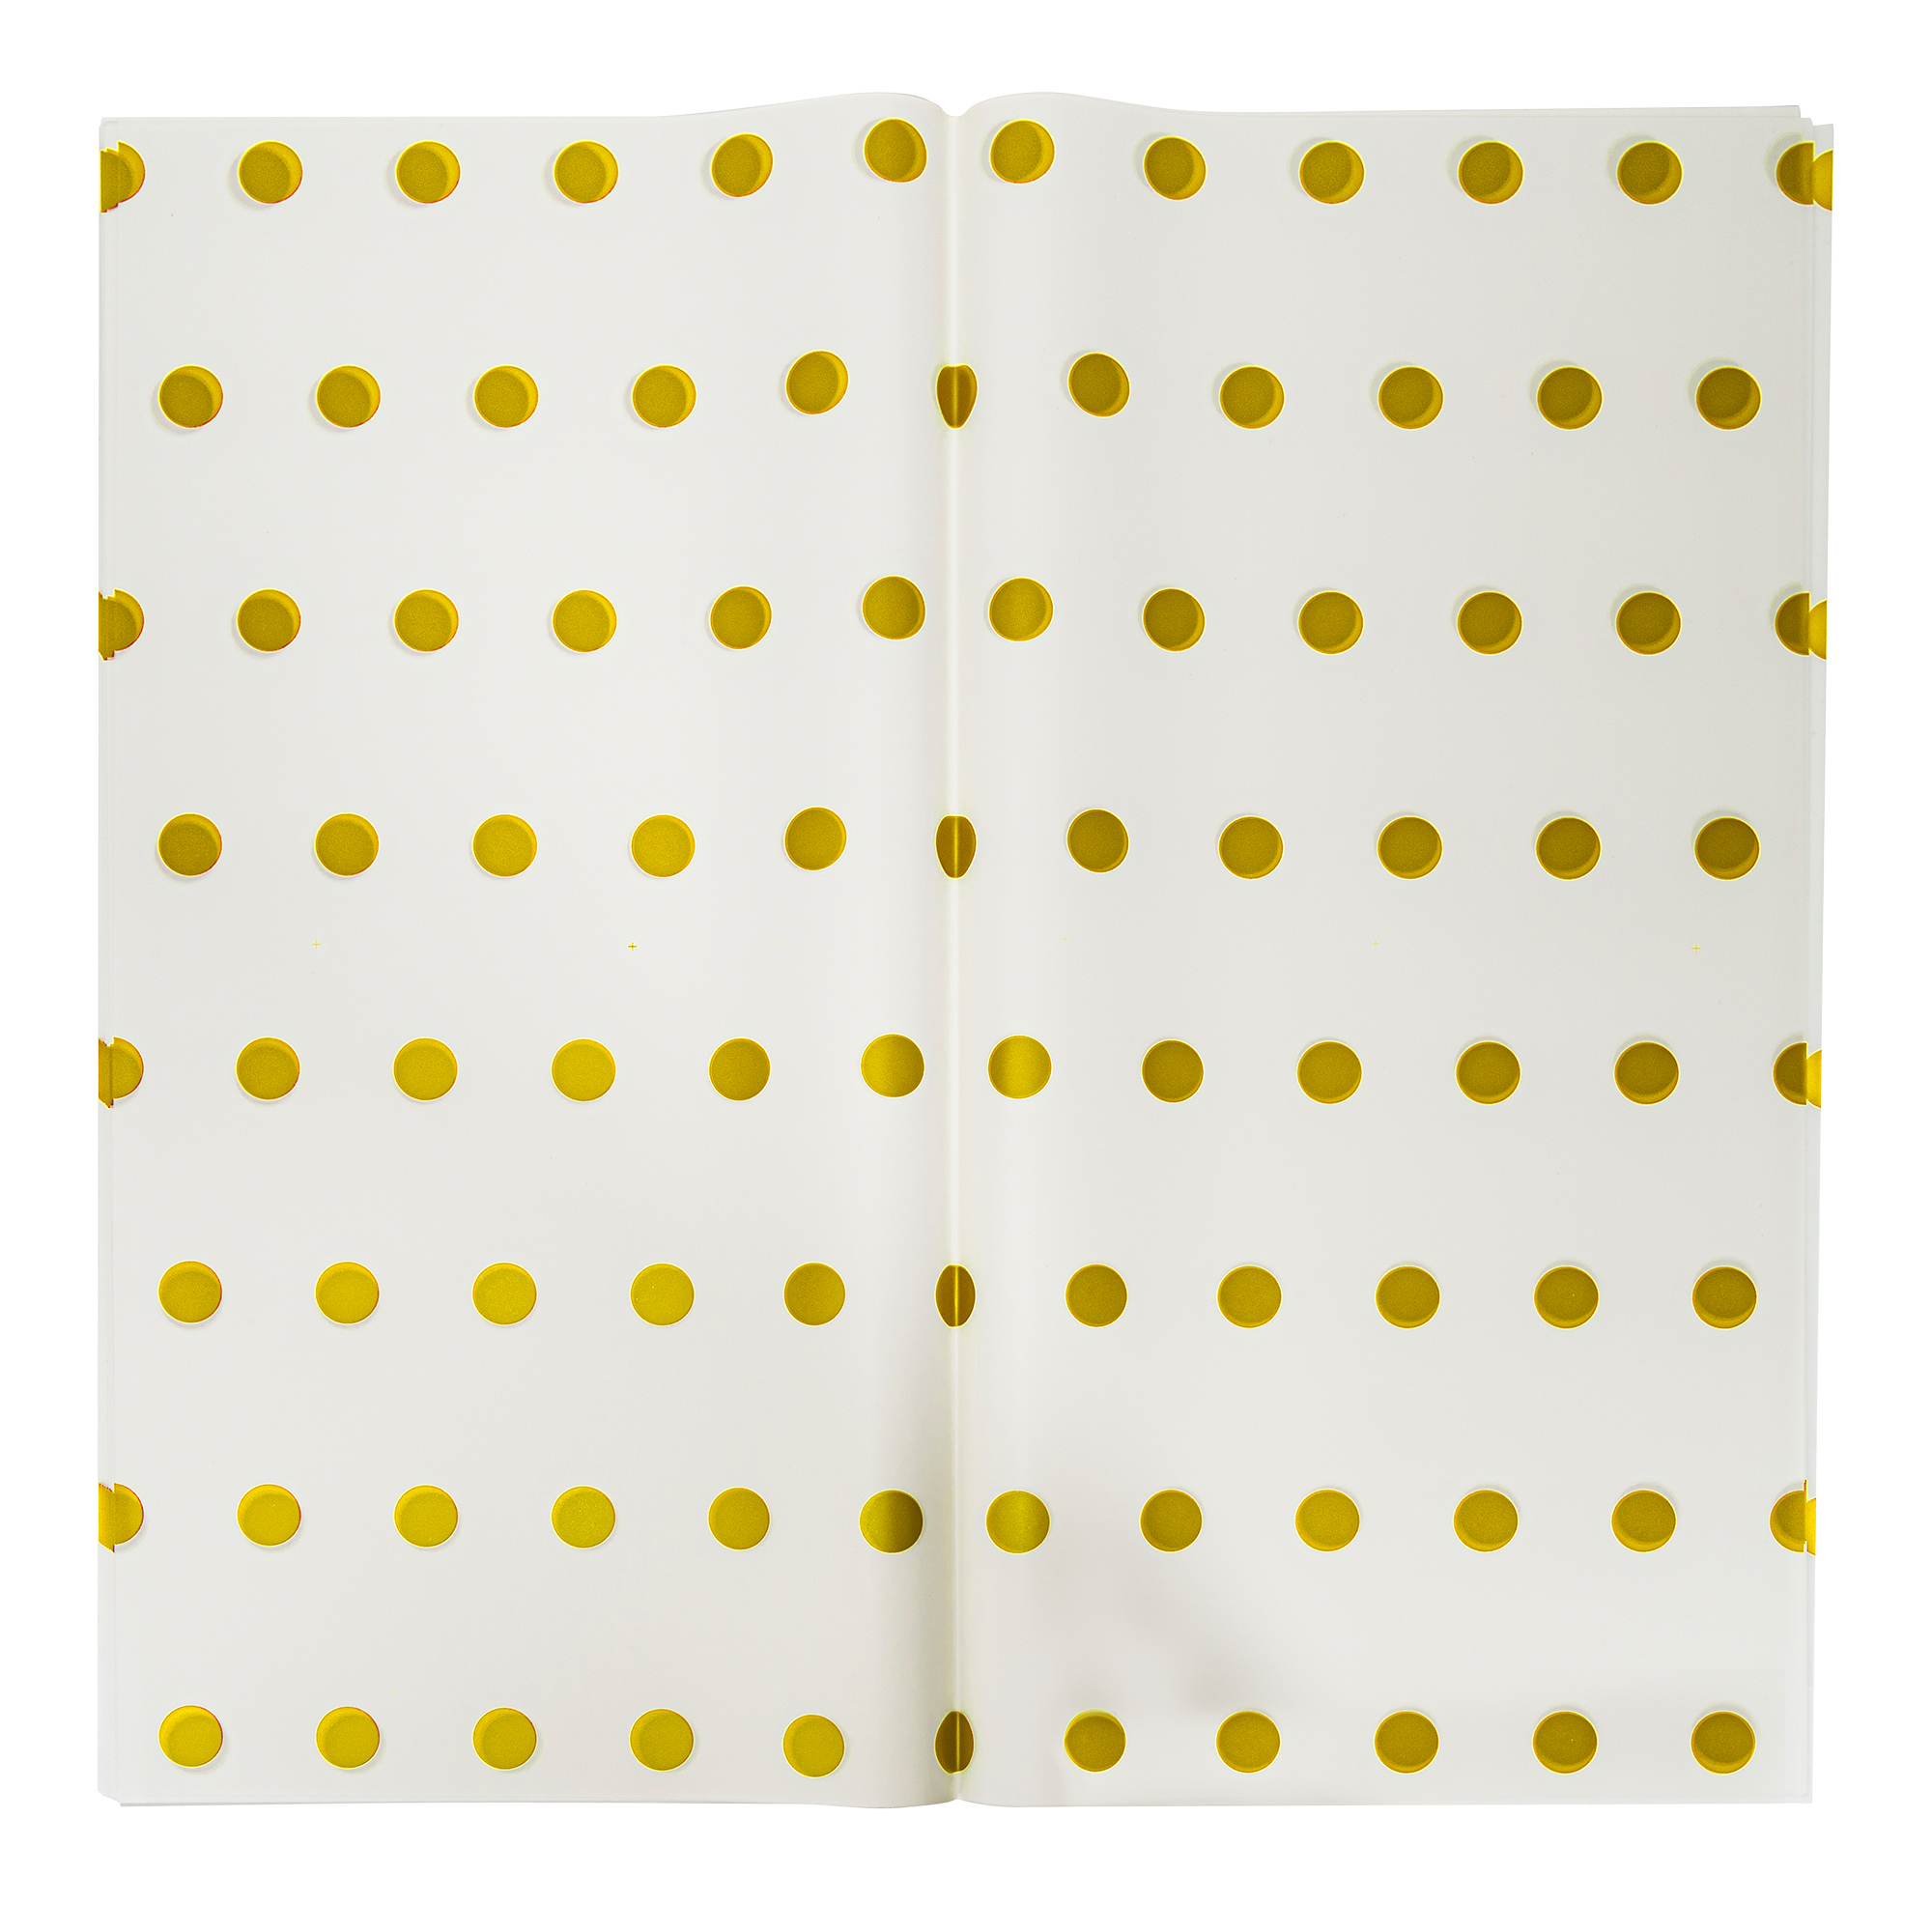 Floral Wrapping Paper With Polka Dots 20pc/pack  - Gold